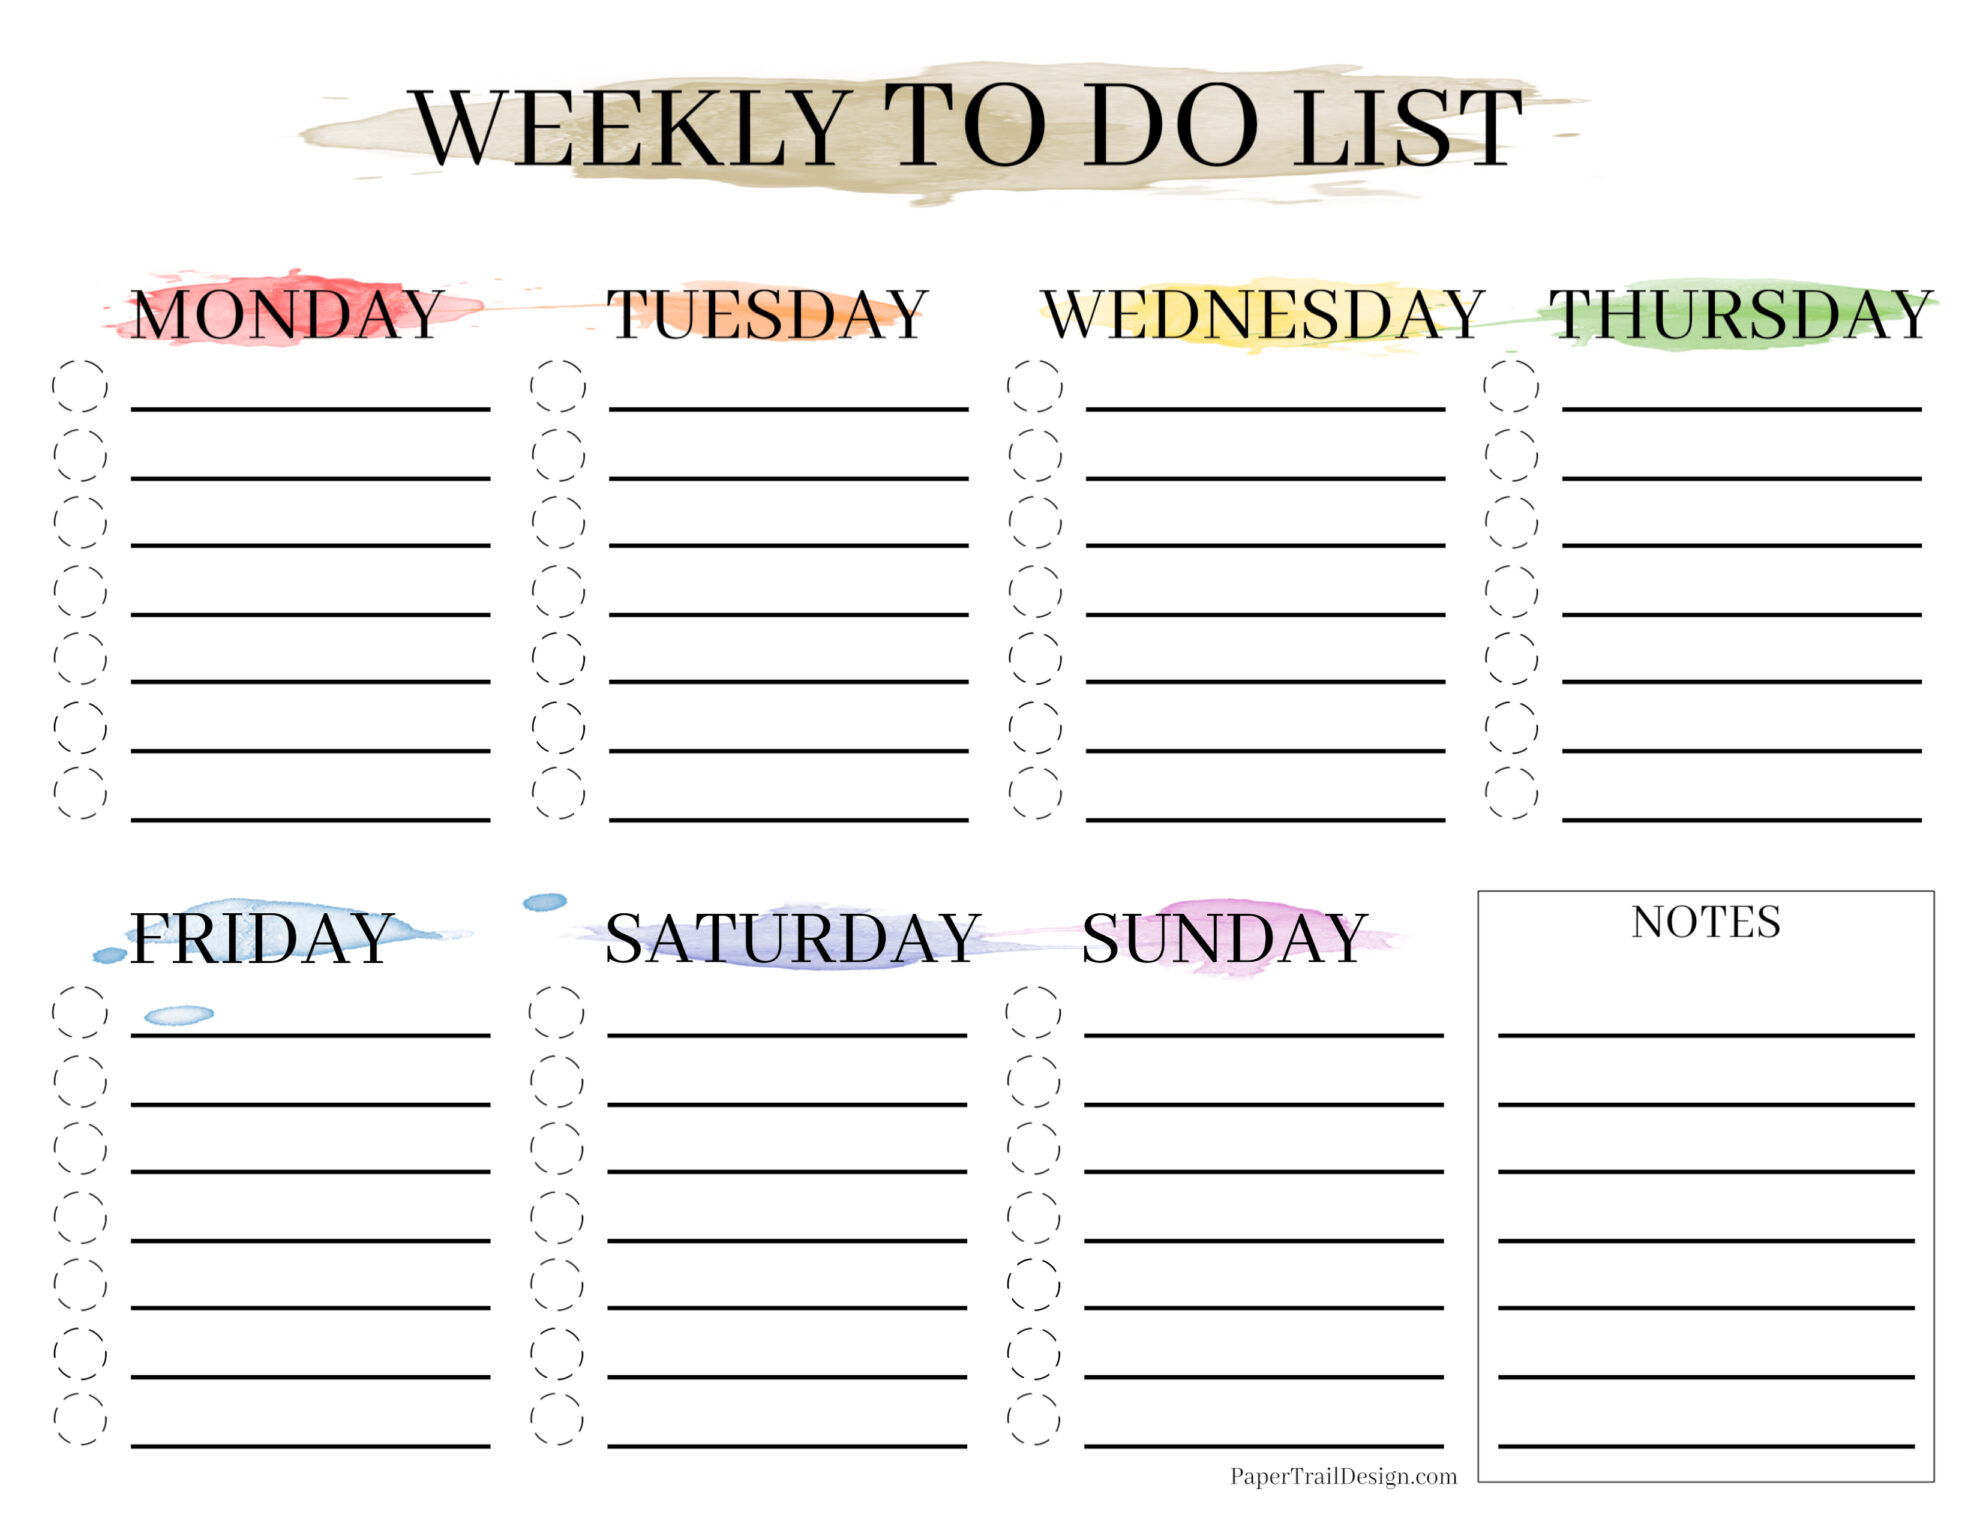 printable-weekly-checklist-to-do-list-paper-party-supplies-etna-pe